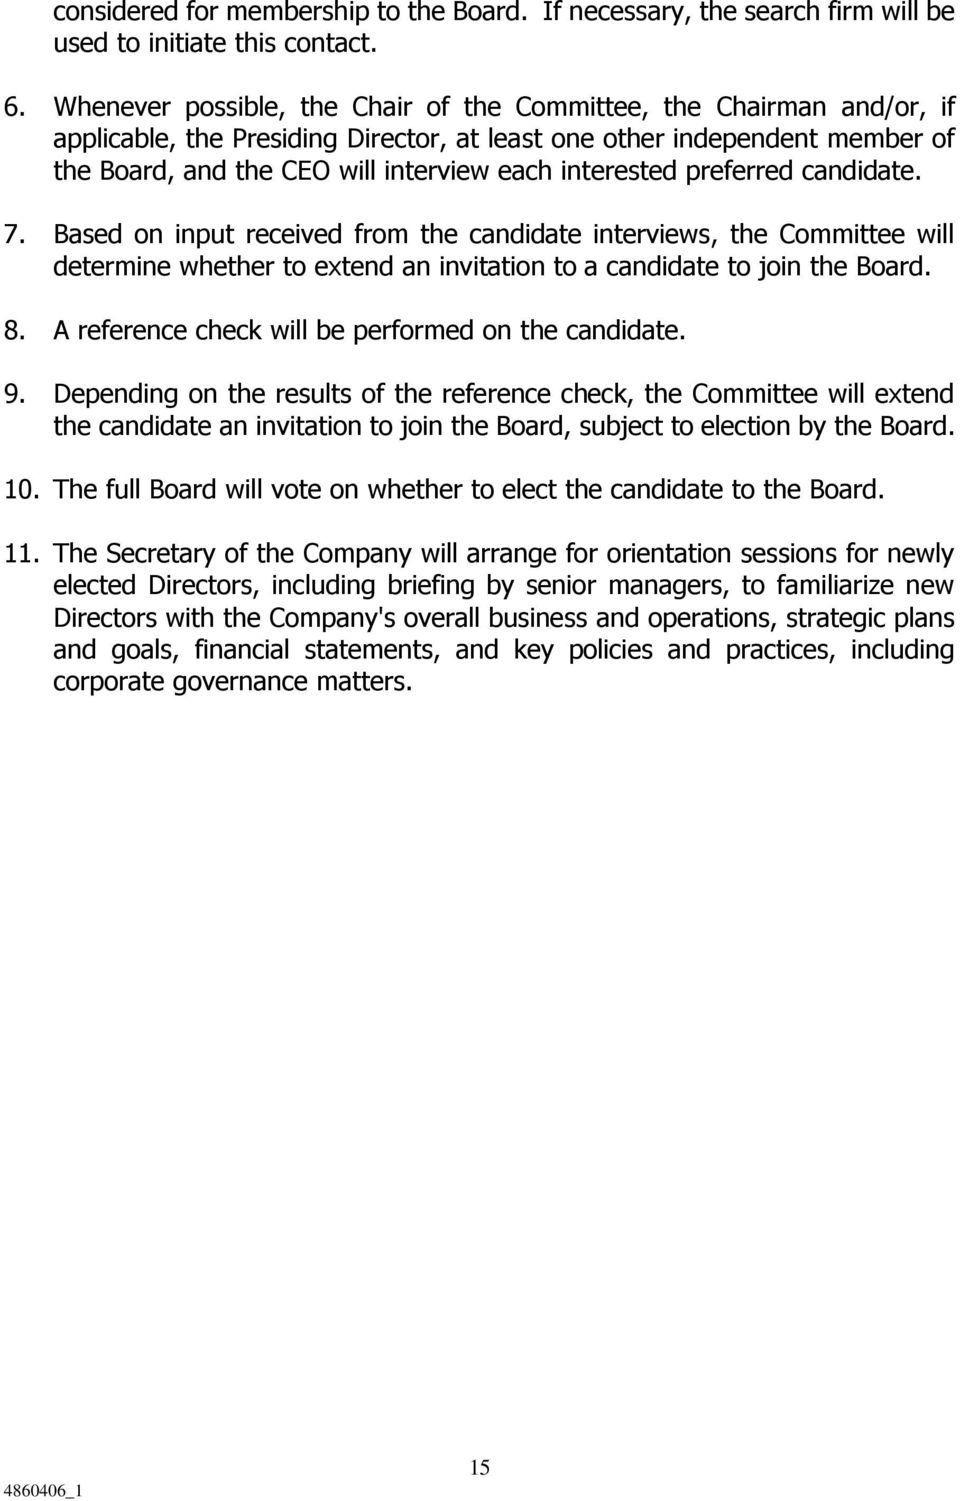 interested preferred candidate. 7. Based on input received from the candidate interviews, the Committee will determine whether to extend an invitation to a candidate to join the Board. 8.